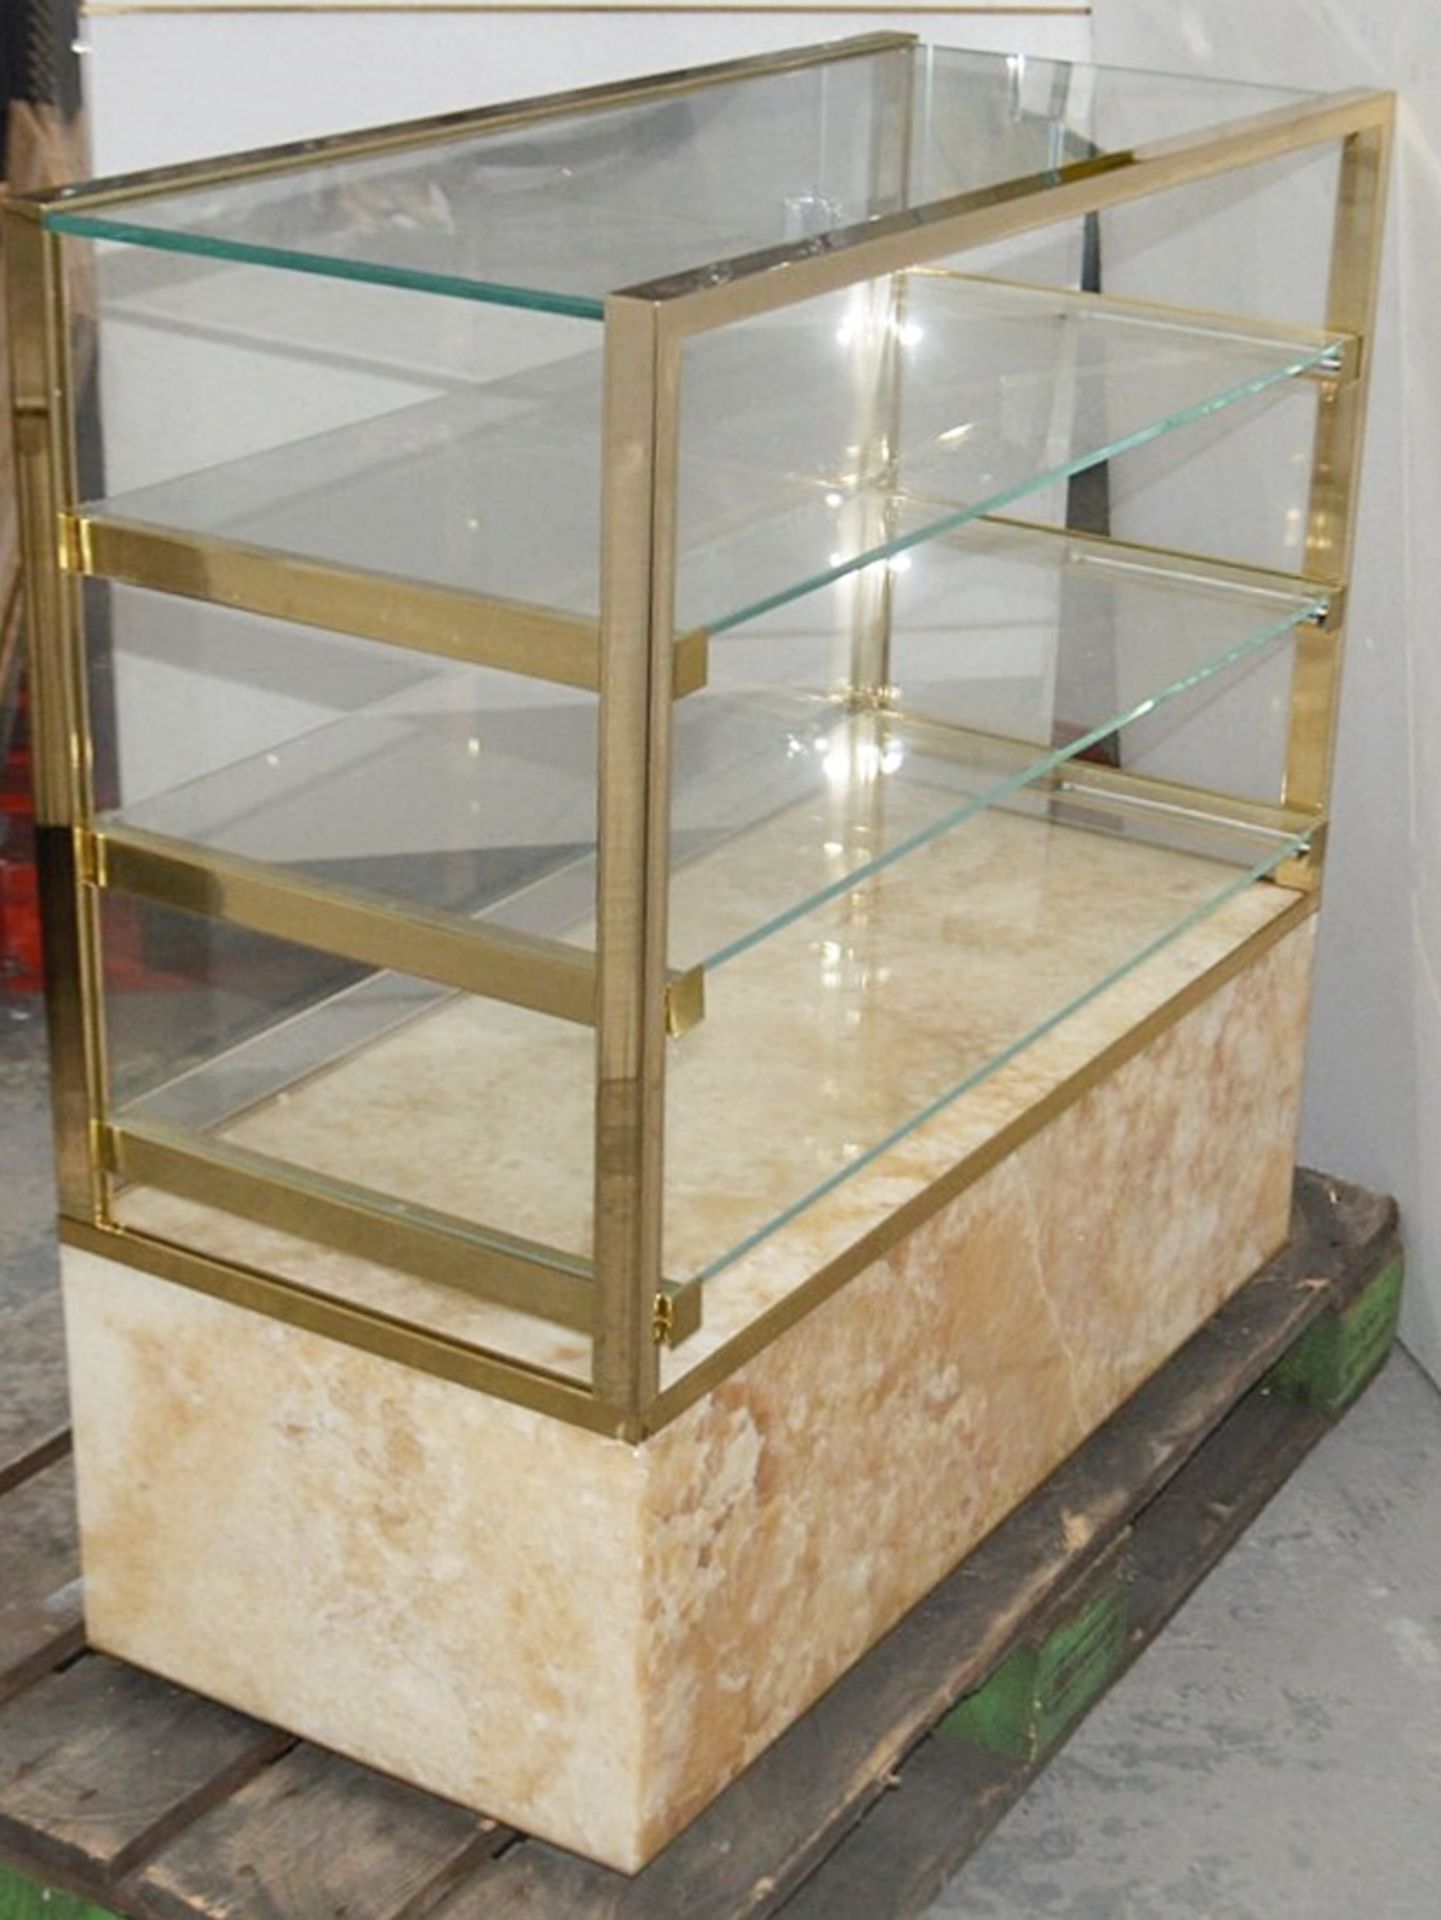 1 x 3-Tier Glass Retail Display Case With Natural Stone Base And Drawer Fronts - Image 2 of 5